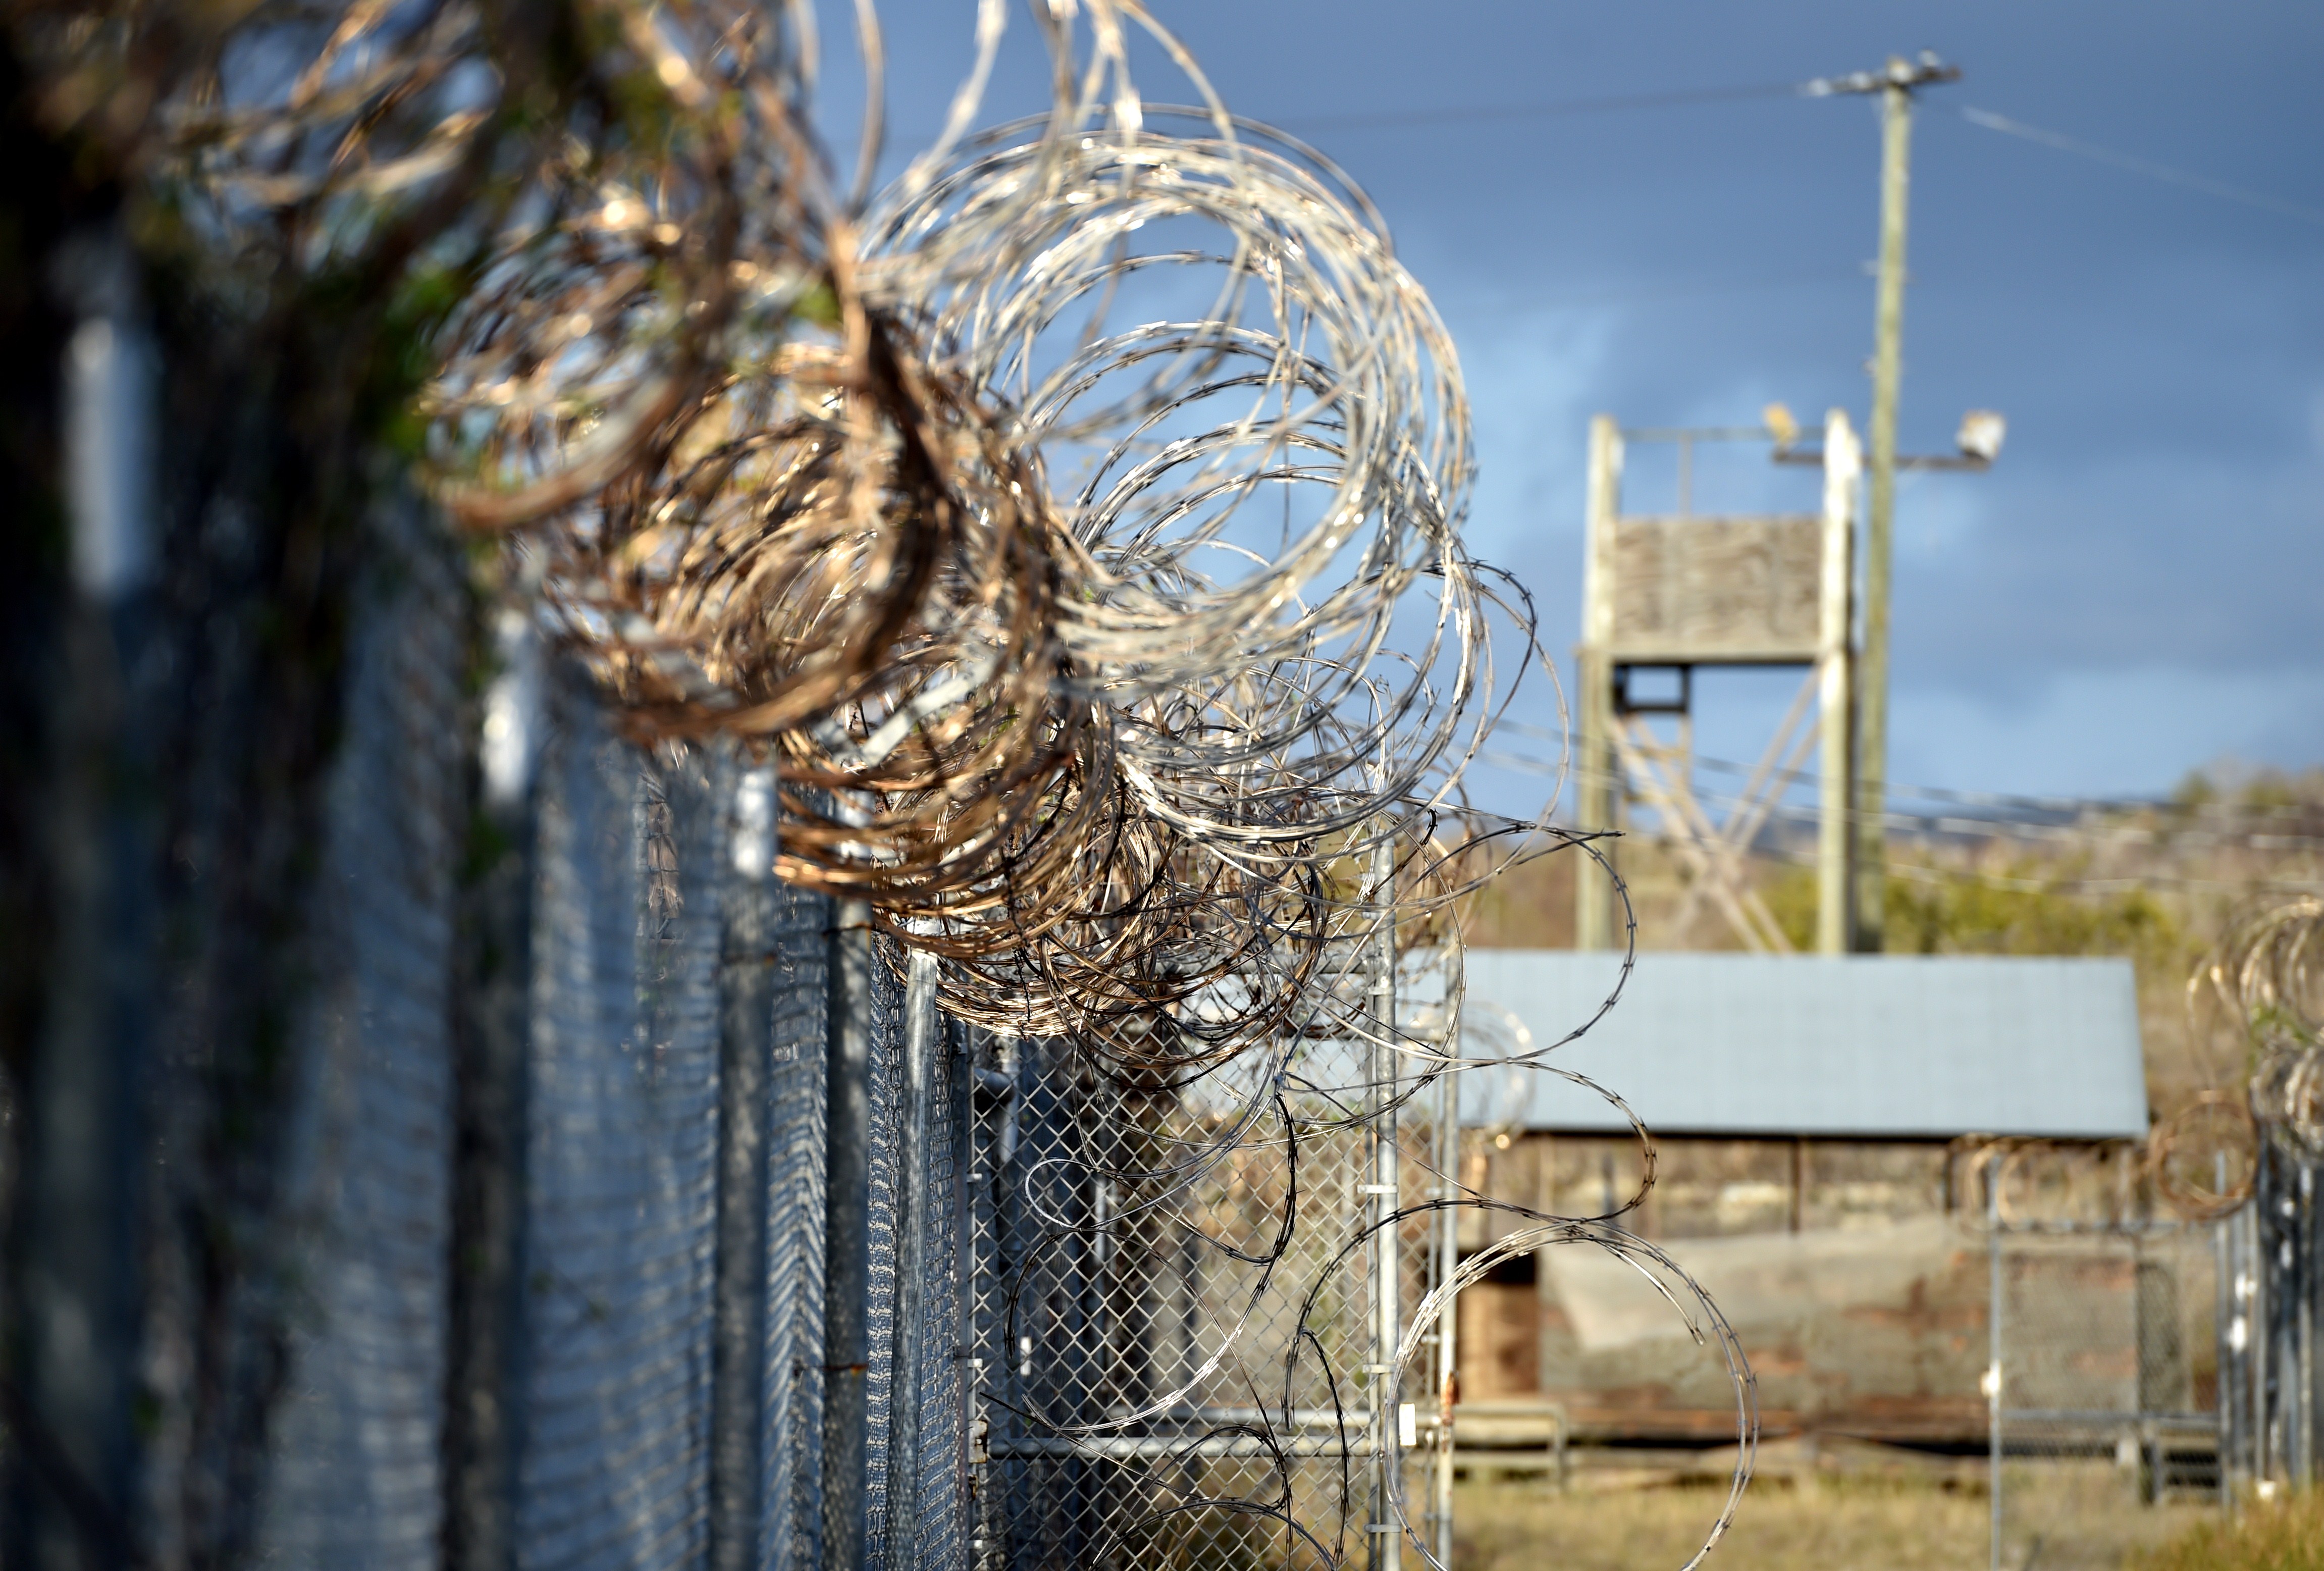 This photo made during an escorted visit and reviewed by the US military, shows the razor wire-topped fence at the abandoned "Camp X-Ray" detention facility at the US Naval Station in Guantanamo Bay, Cuba. (Mladen Antonov—AFP/Getty Images)